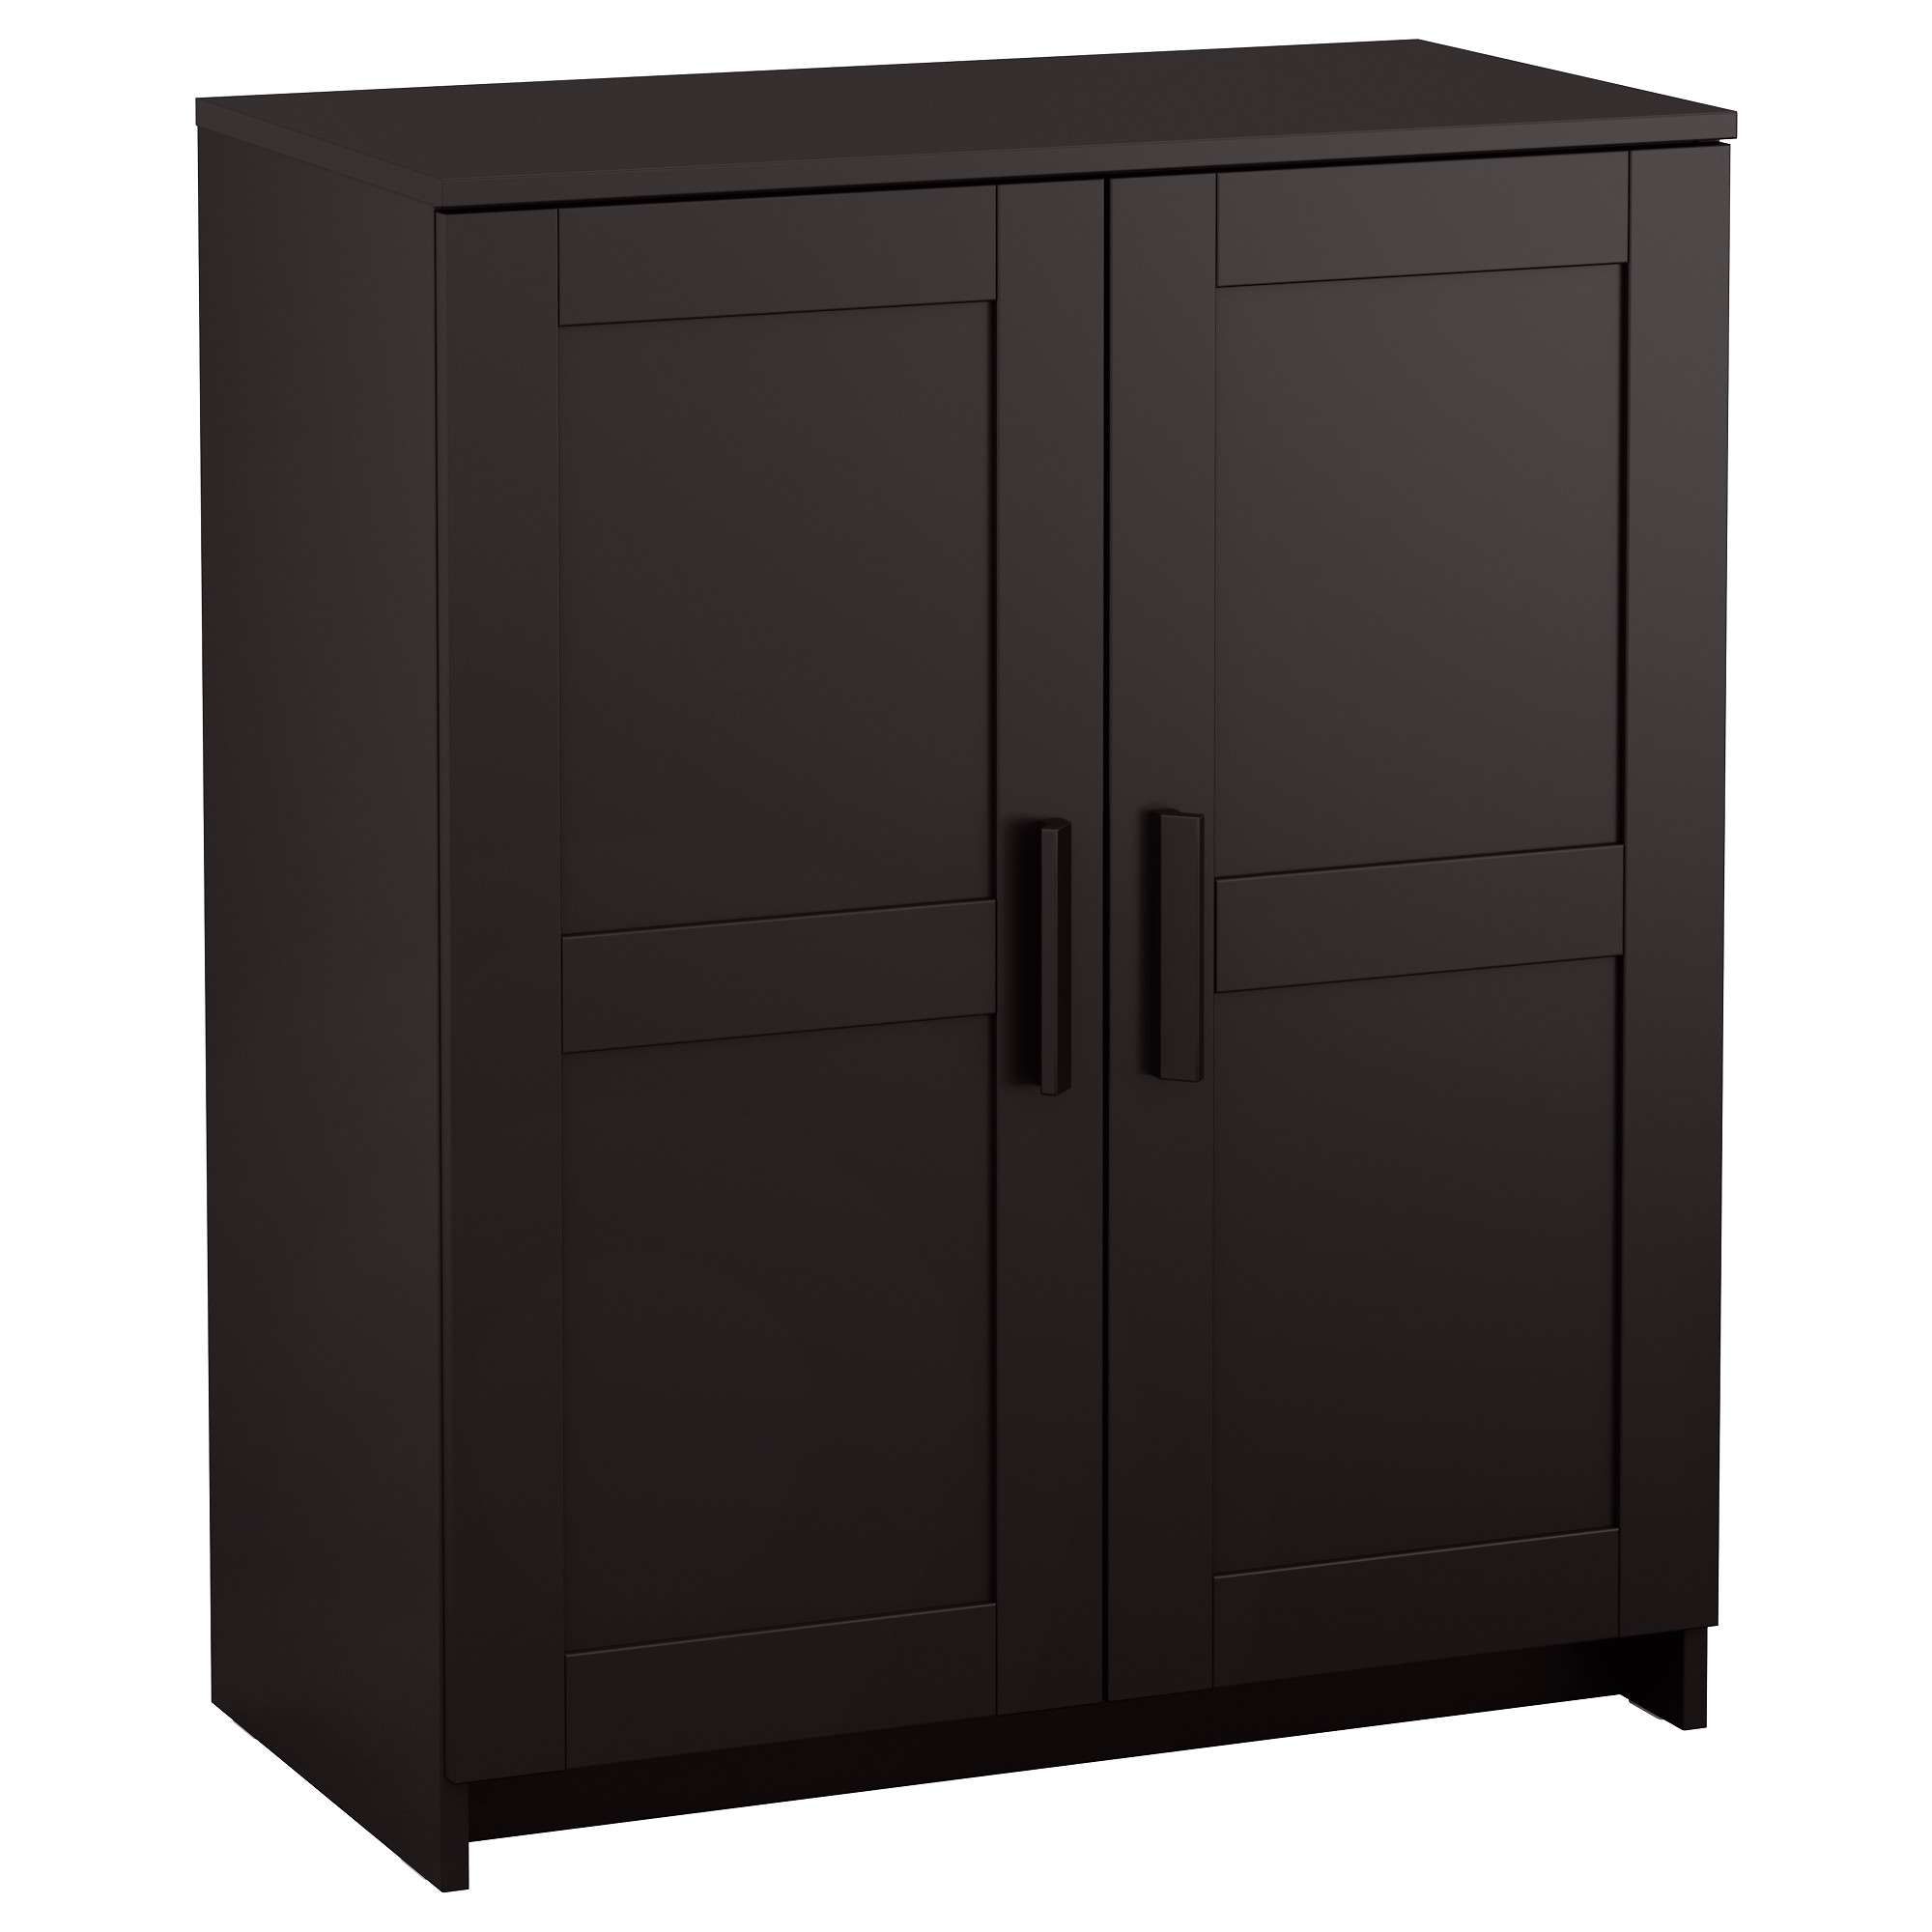 Cabinets & Sideboards – Ikea In Sideboards With Glass Doors And Drawers (View 13 of 20)